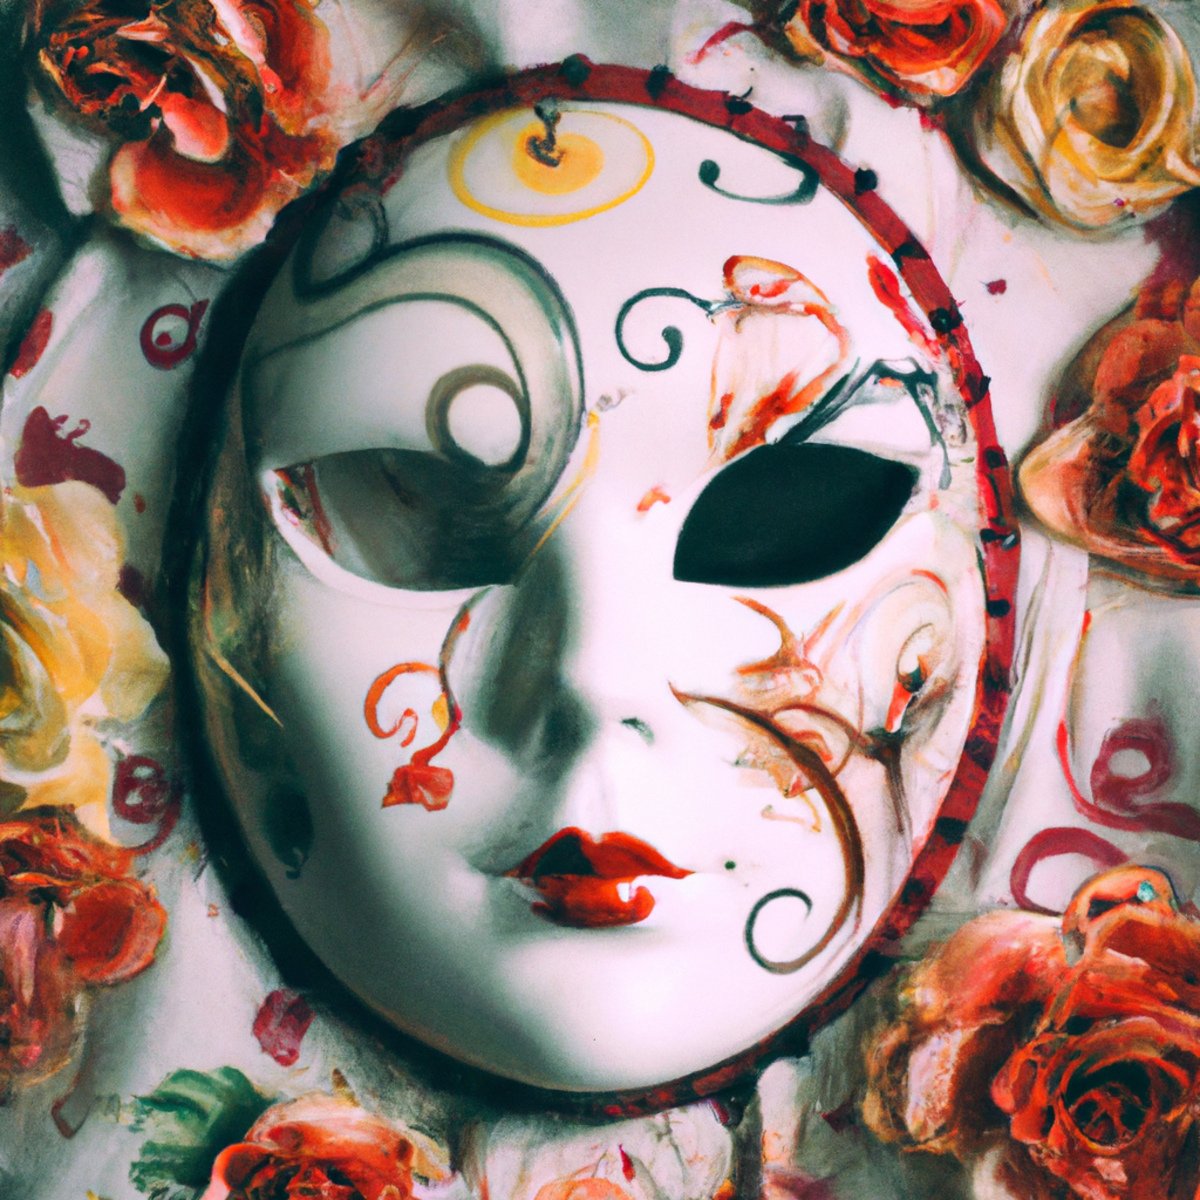 Delicate porcelain mask on vibrant flowers, symbolizing emotional facade and resilience of Harlequin Ichthyosis.